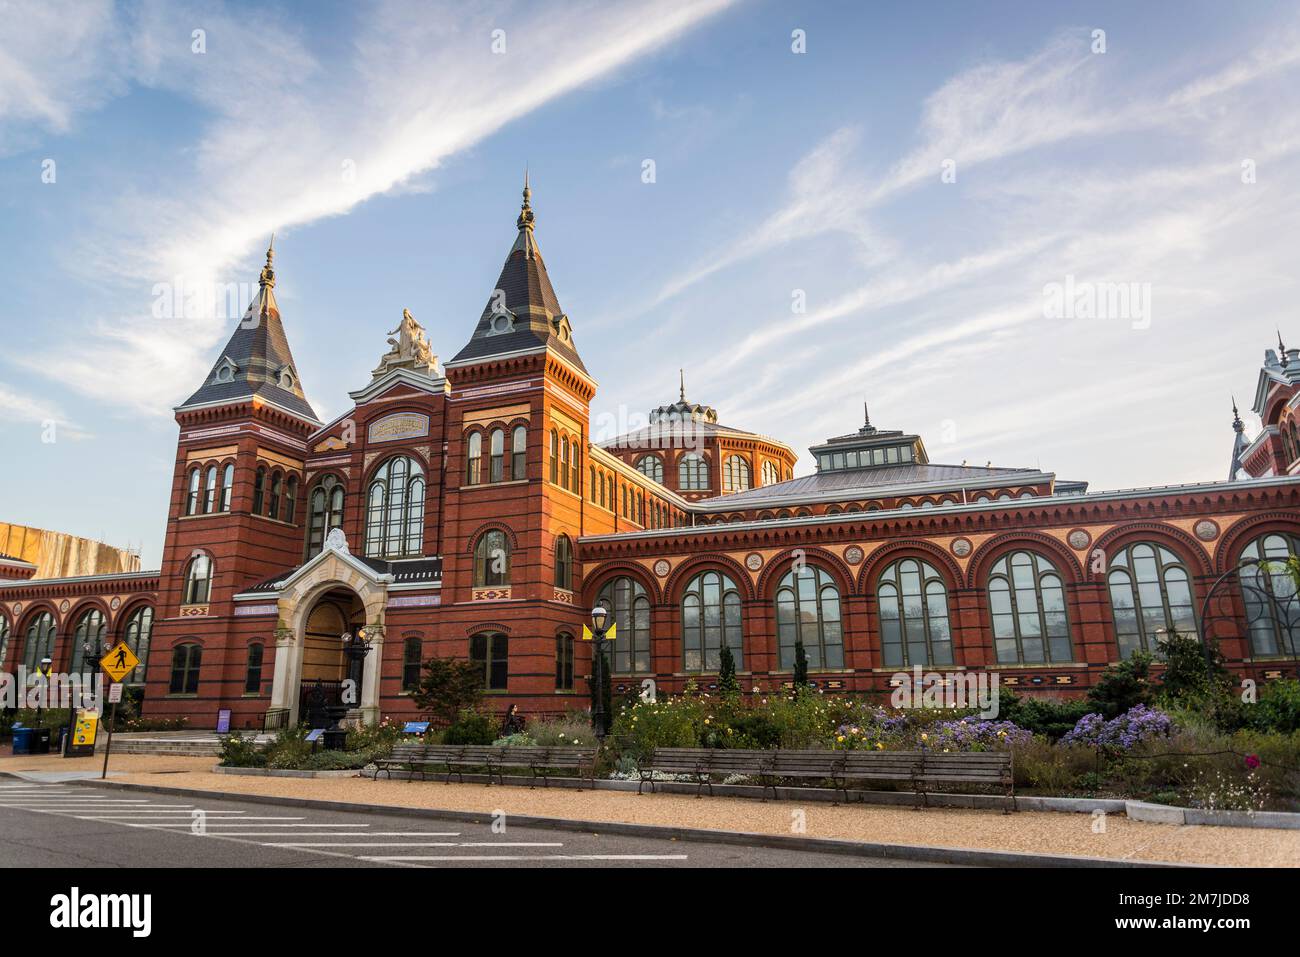 Arts and Industries Building, the second oldest (after The Castle) of the Smithsonian museums on the National Mall, Washington, D.C., USA Stock Photo